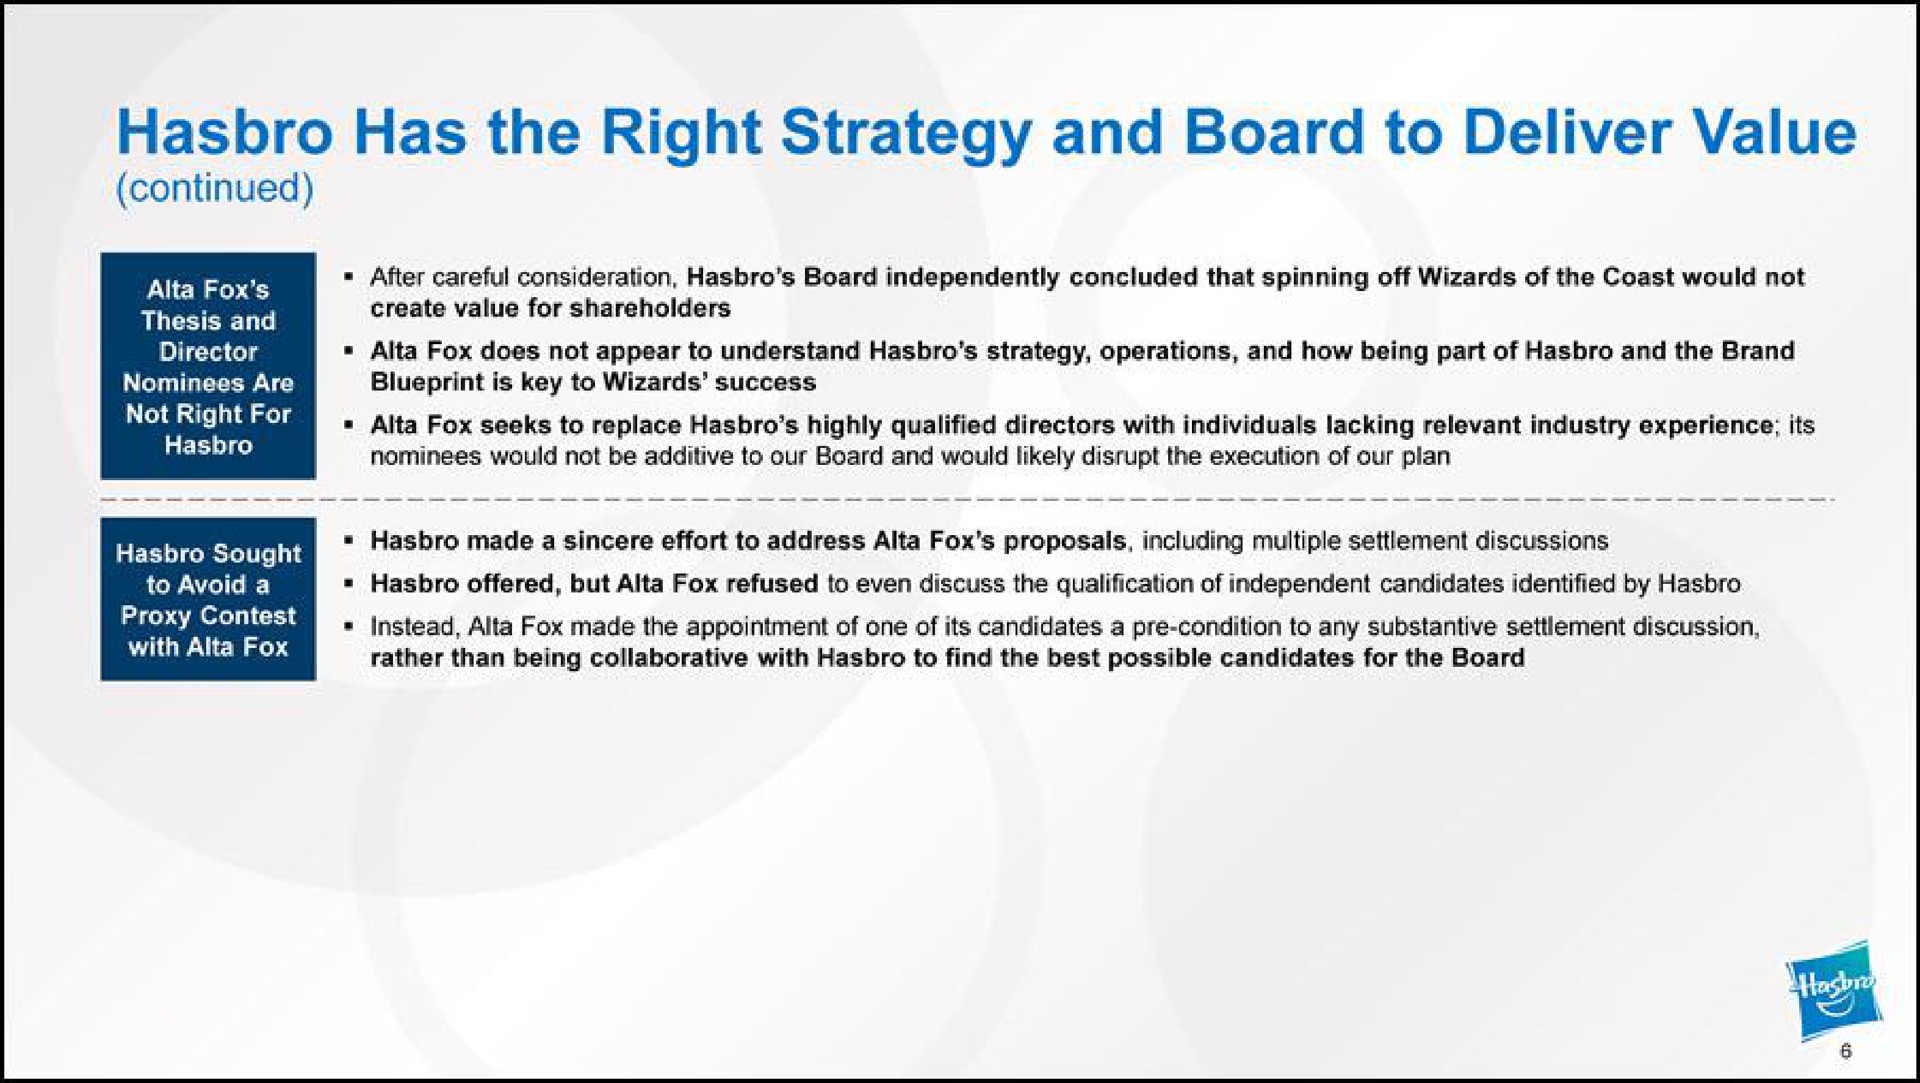 has the right strategy and board to deliver value continued | Hasbro